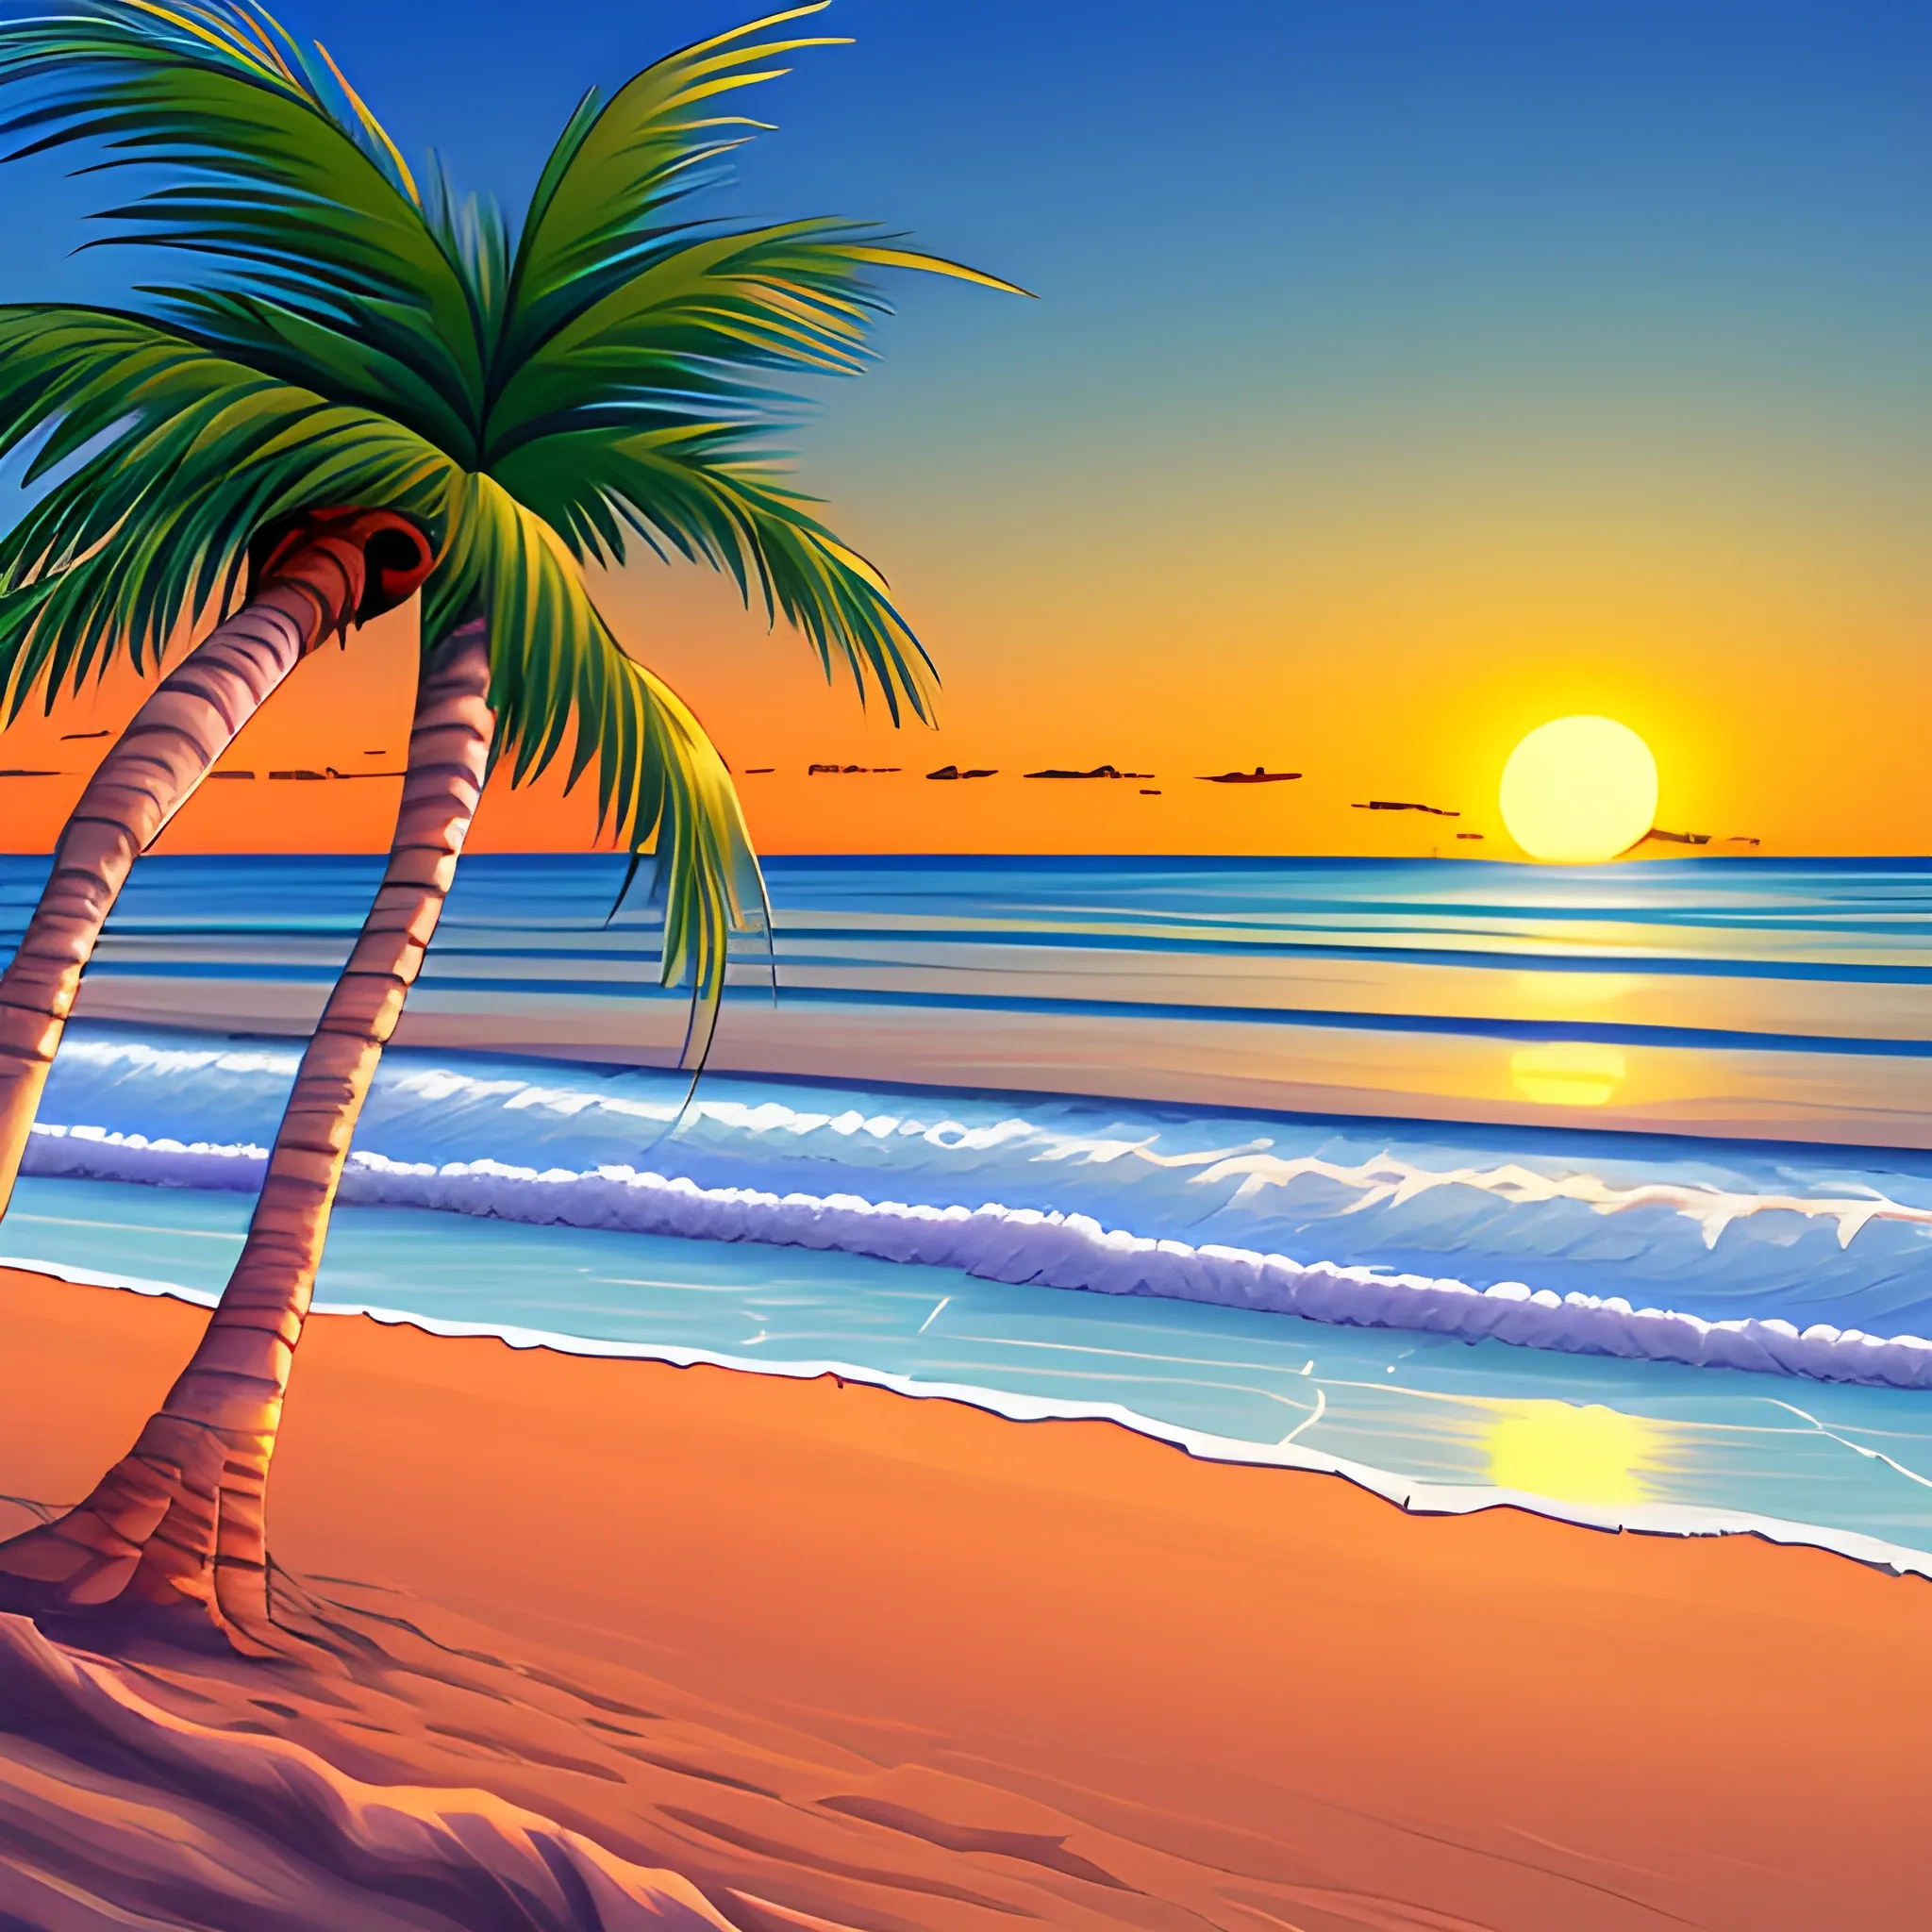 2d, sunset at the beach, include palm trees, no people, empty beach, landscape view, Cartoon